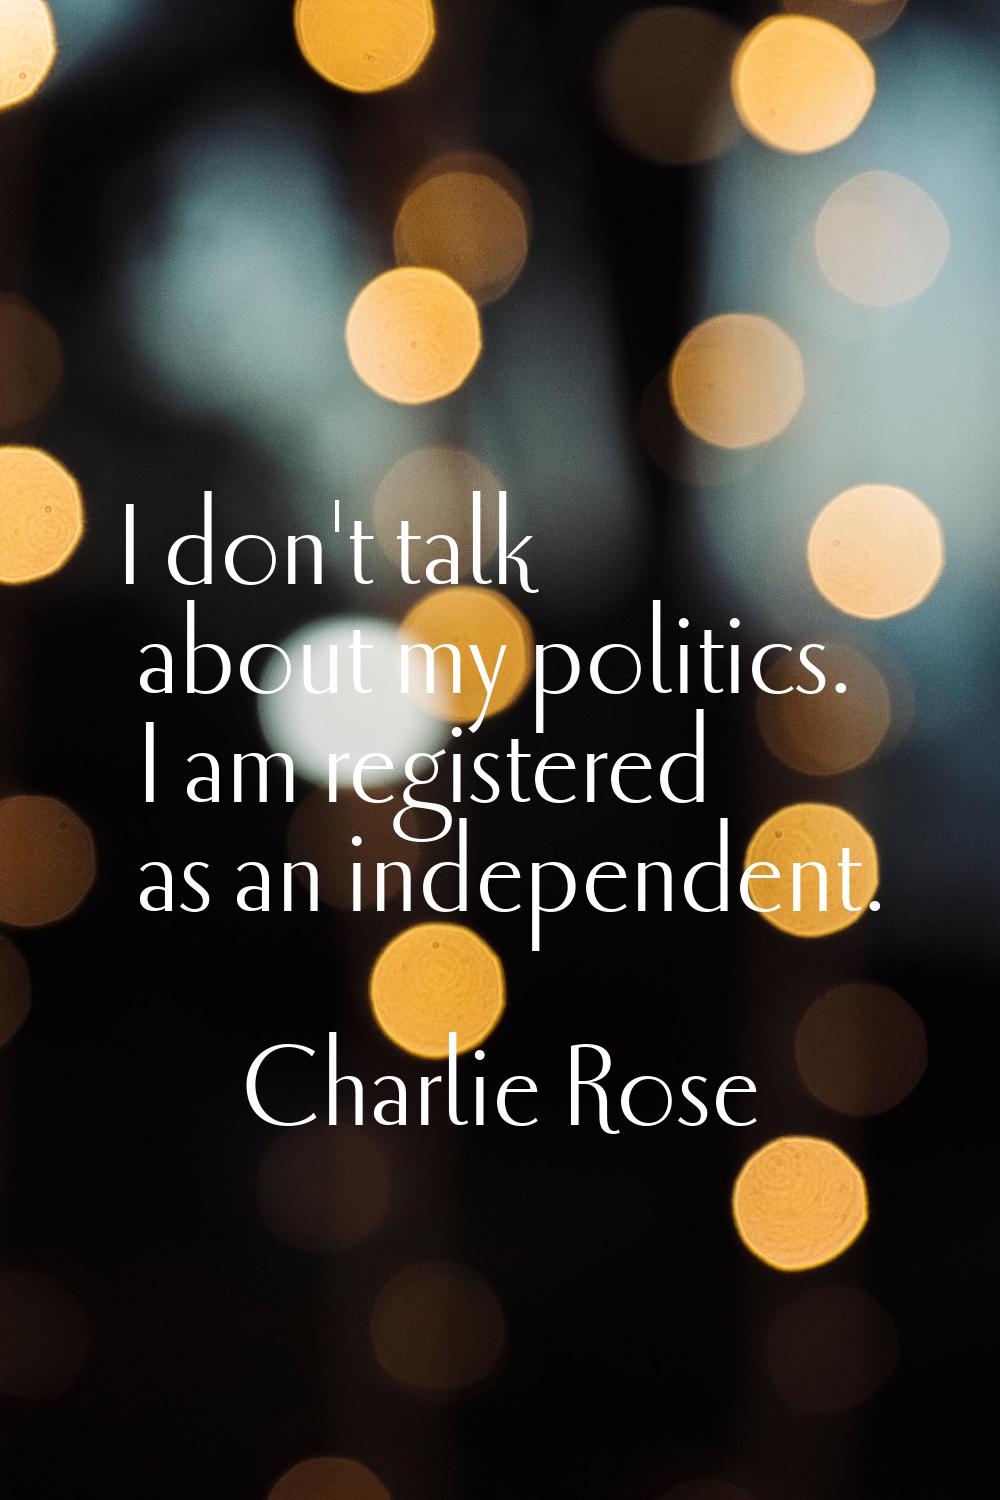 I don't talk about my politics. I am registered as an independent.